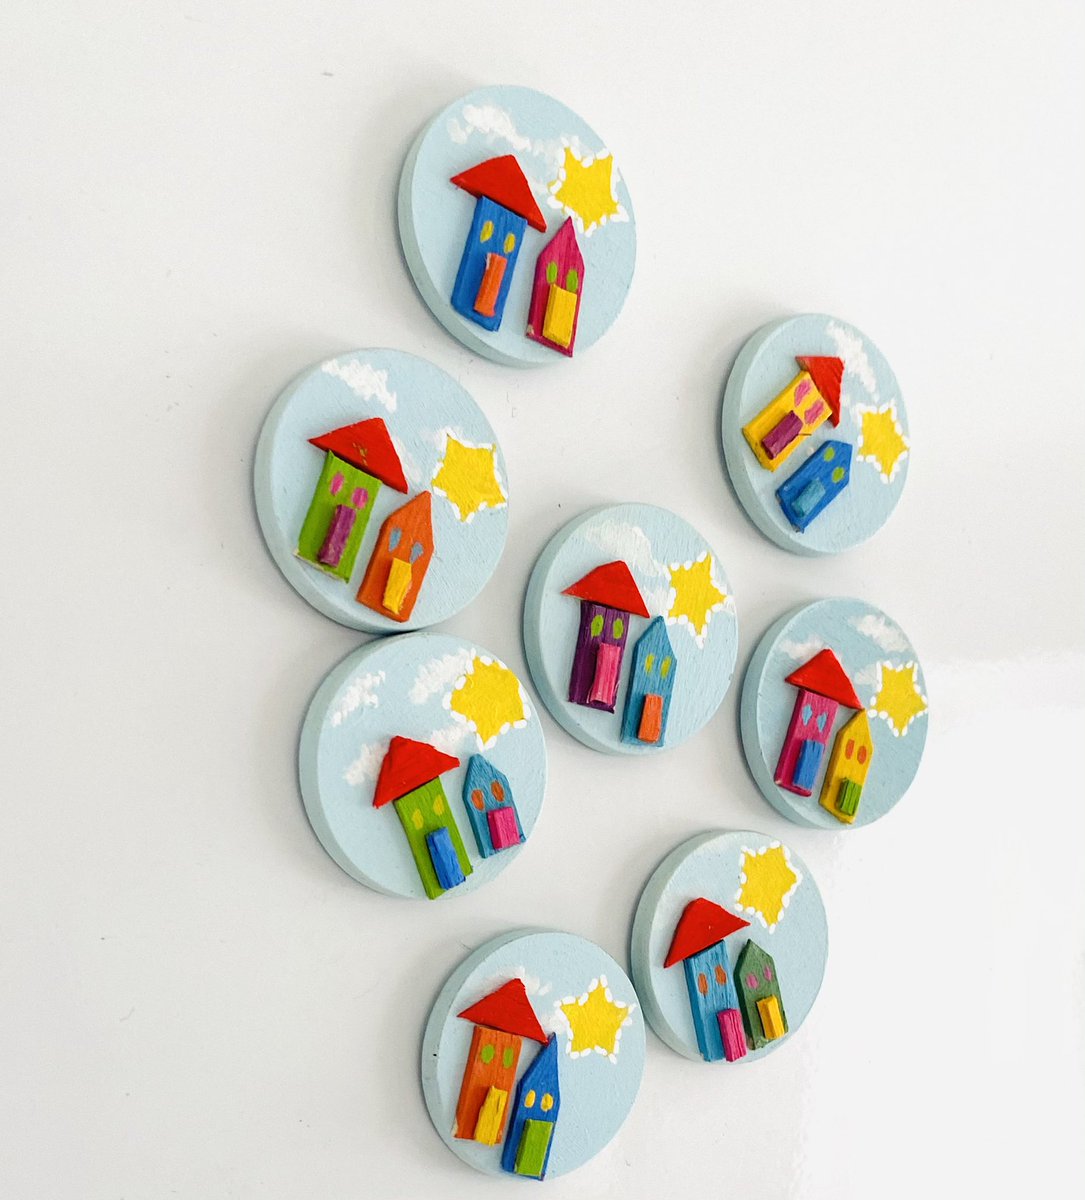 Happy fridge magnets that can be turned into #keyrings or #brooches
#magnets #fridgemagnets #SmallBusiness #colorfulmagnets #handmademagnets #numonday @HandmadeHour @online_craft @H_madeFestival @HMNation @handmade_net